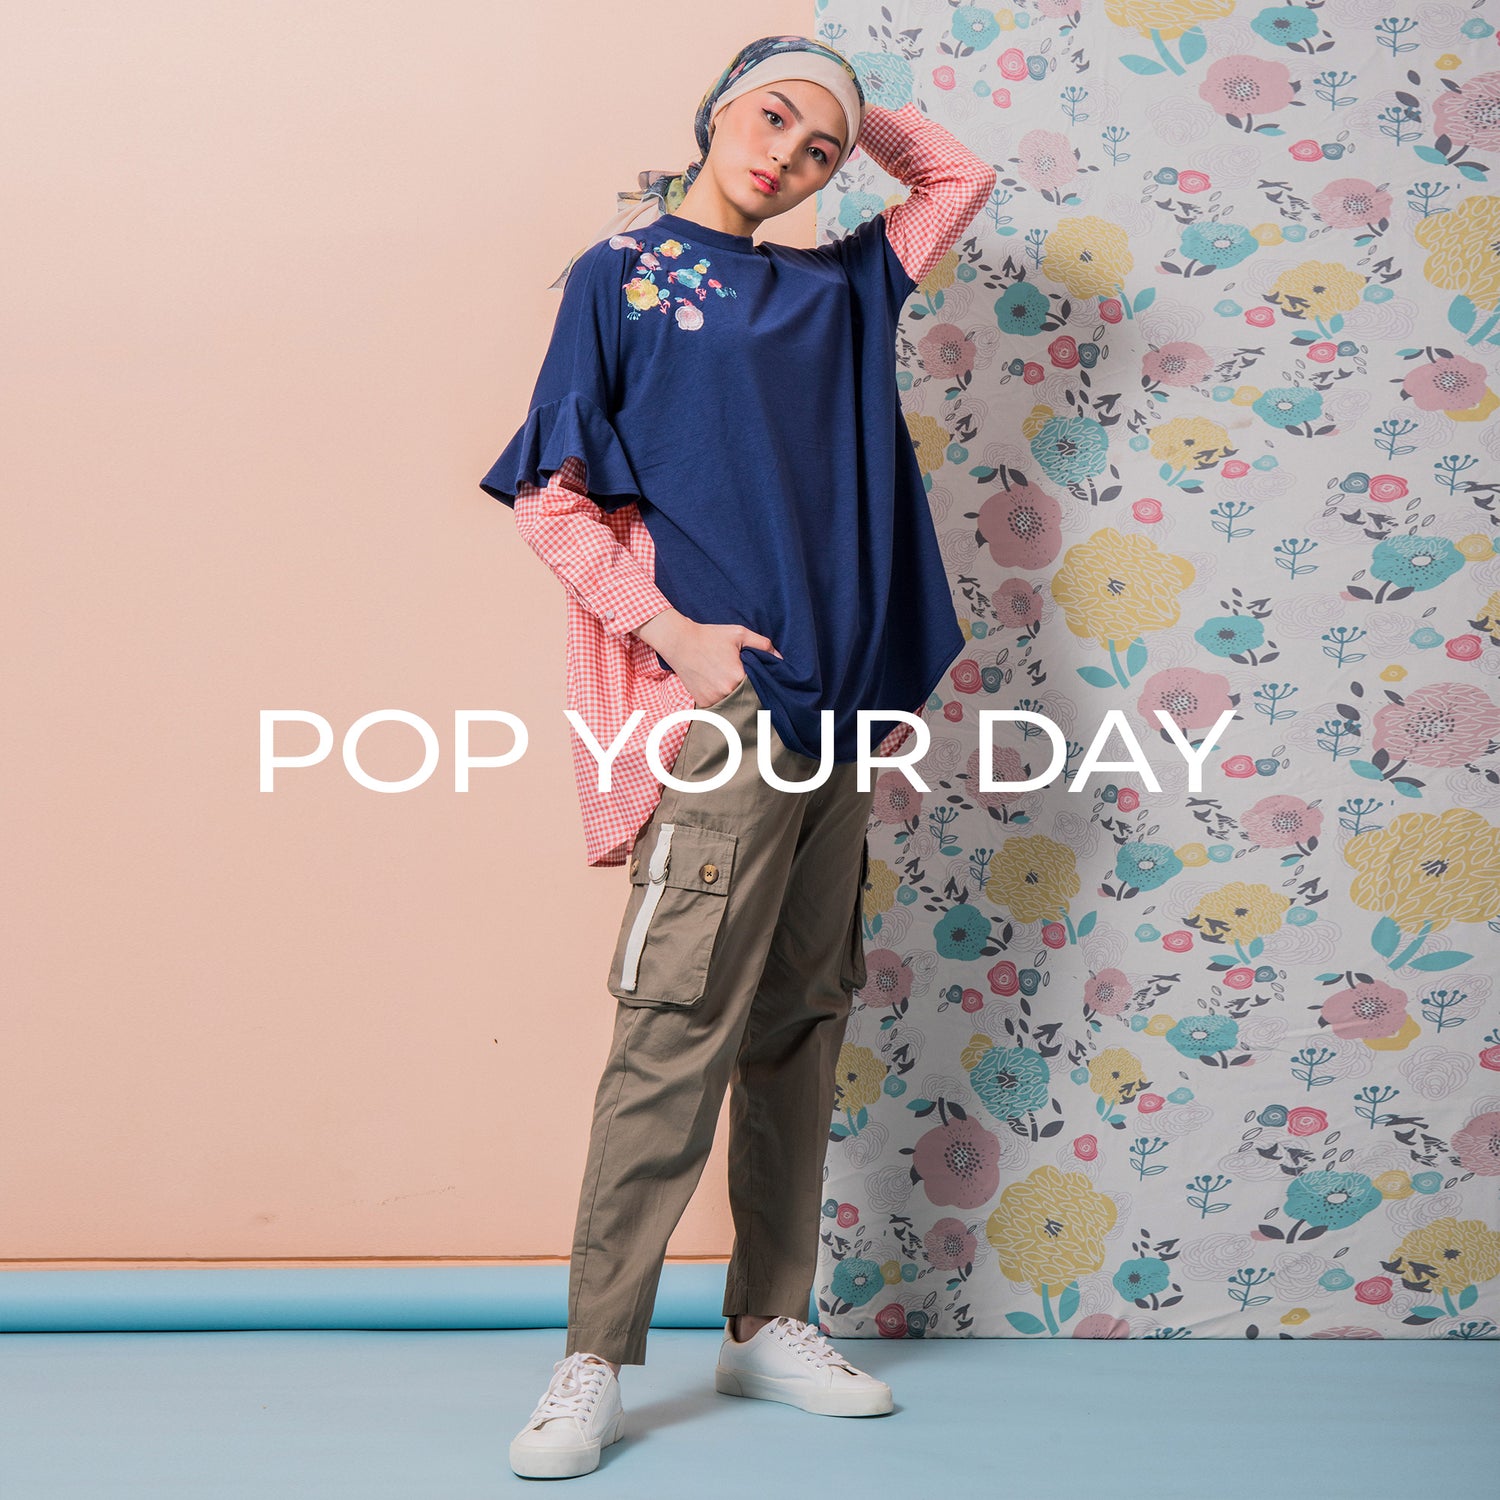 Pop Your Day